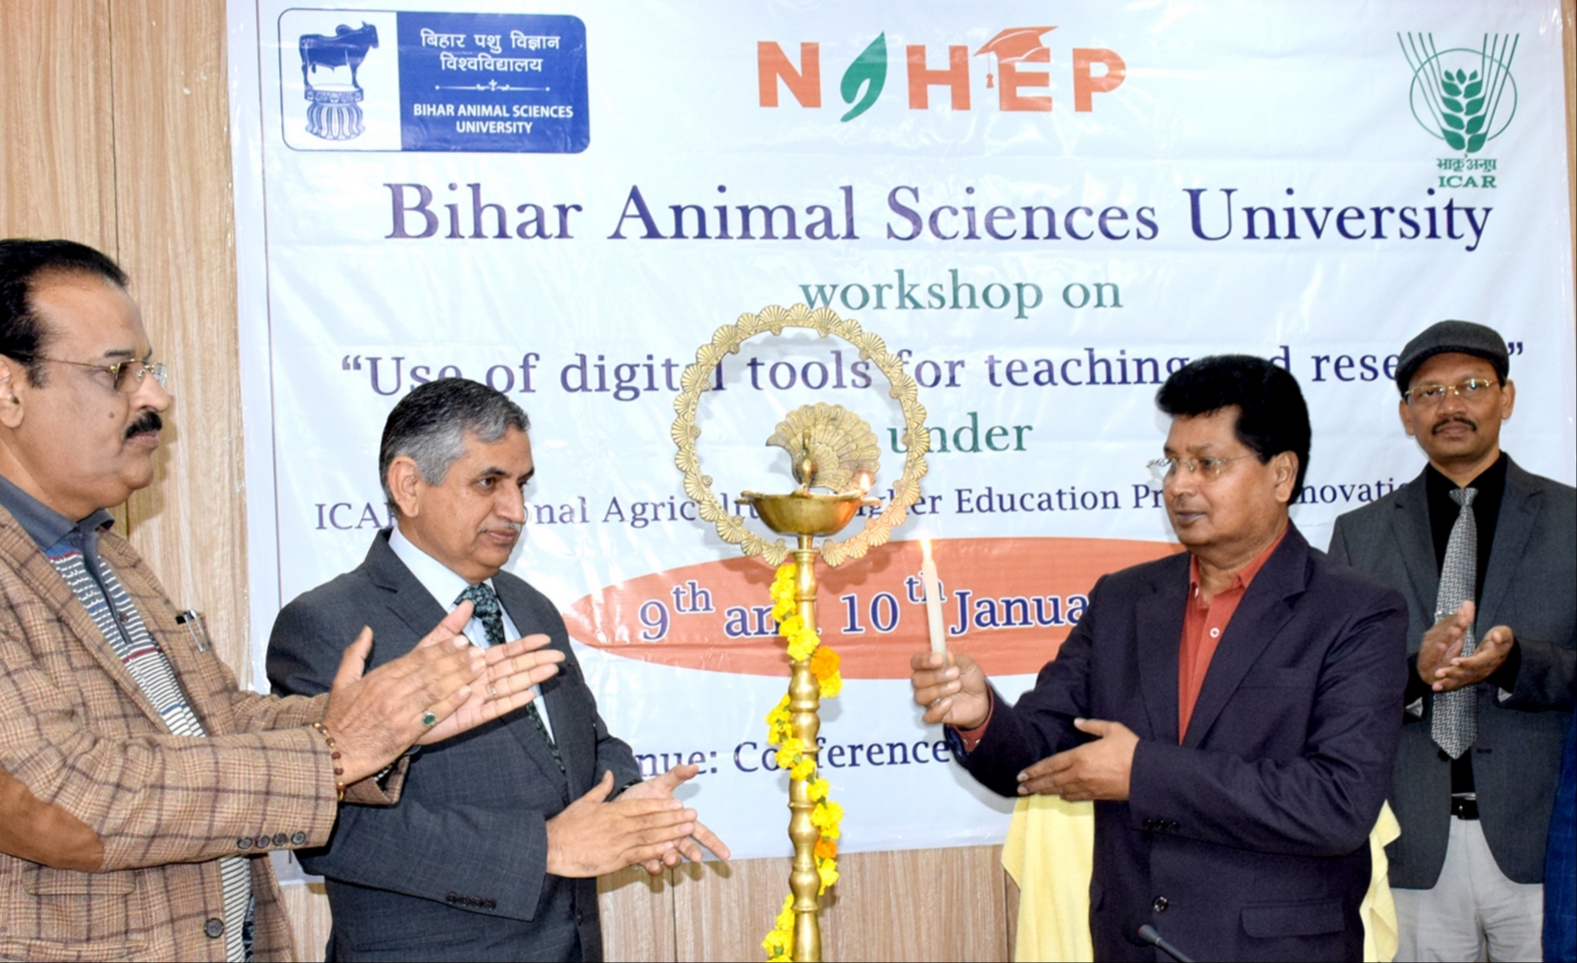 Photography is a essential tool for study : dr sushil ankan